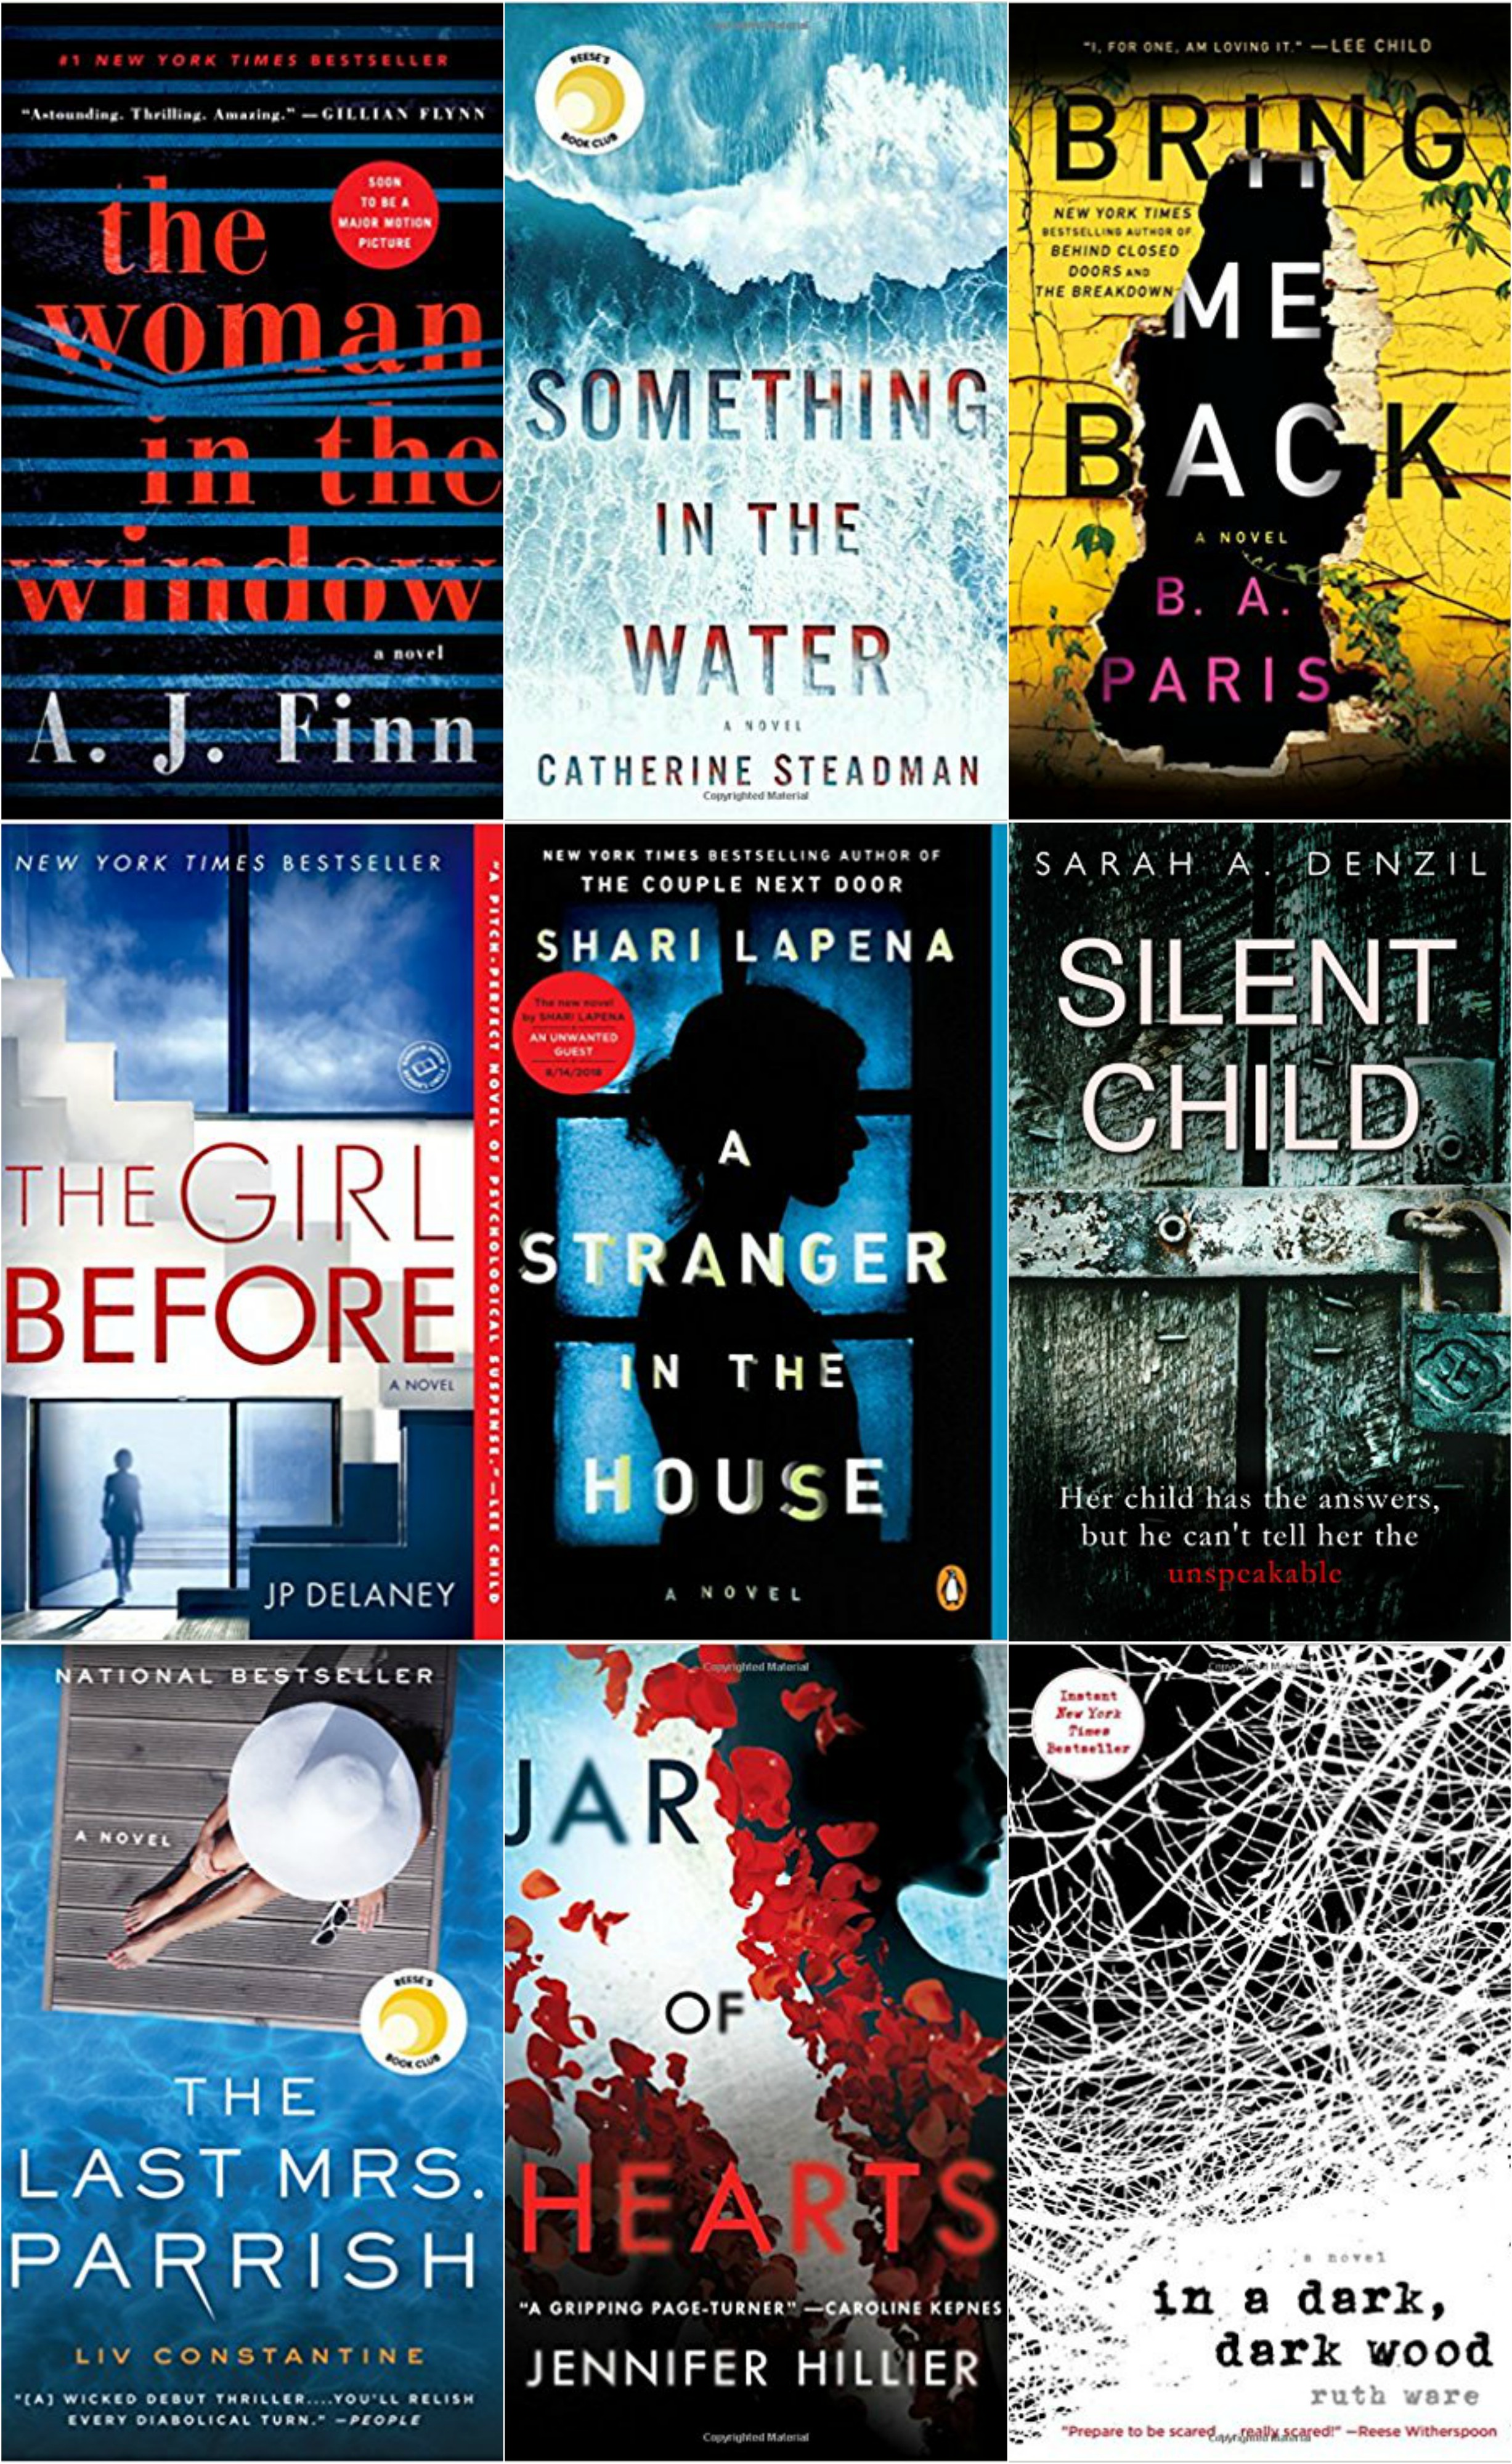 9 Thrillers You Need To Read Right Now - Psychological Thrillers - Best New Books - Books Like Gone Girl - Books Like Big Little Lies - Authors Like Liane Moriarty - Gillian Flynn - Thriller Books - Communikait by Kait Hanson #psychologicalthrillers #thrillers #novels #books #bookstoread